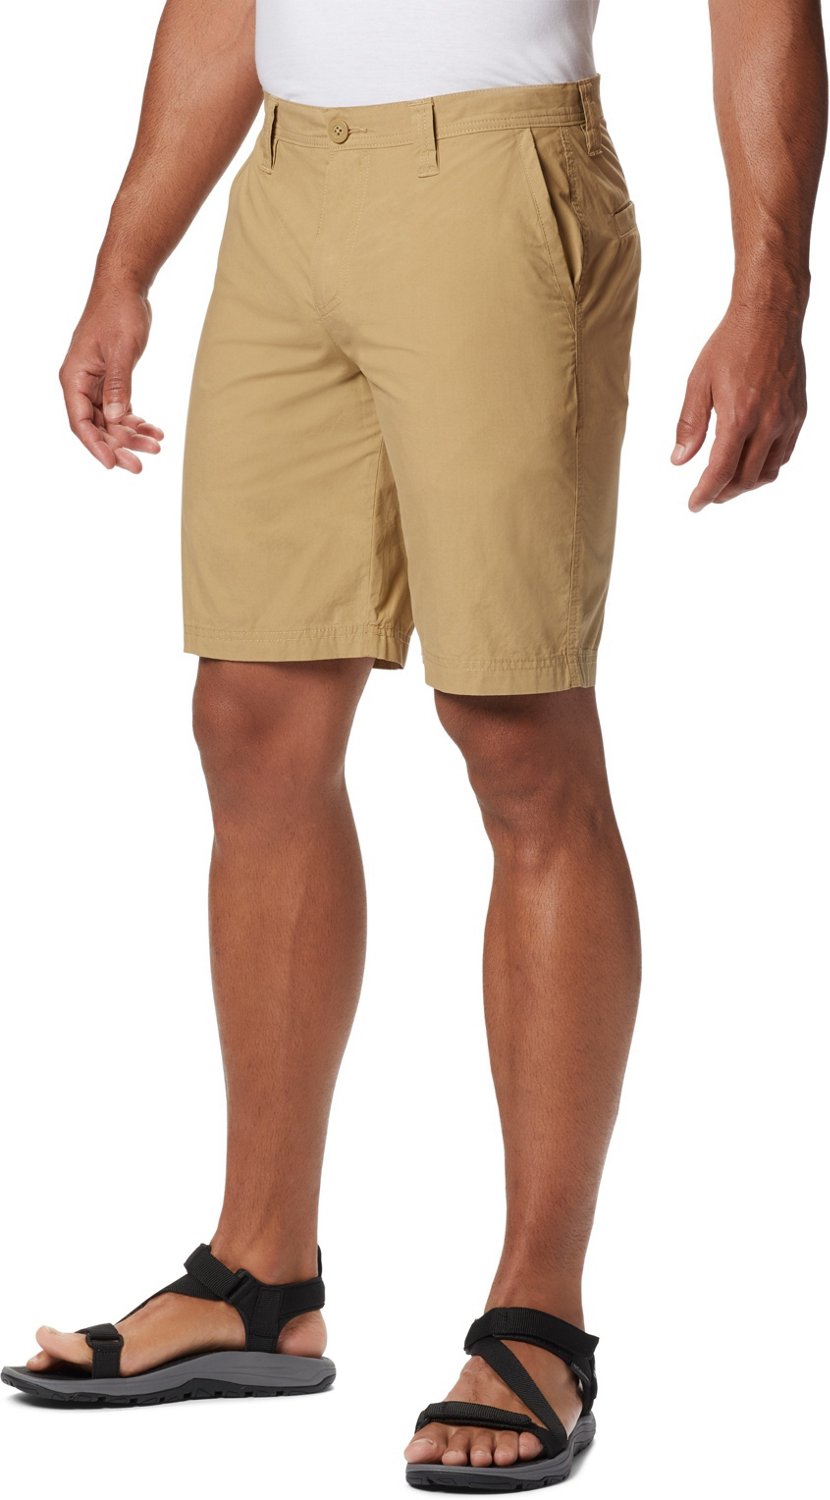 get nervous Fortress disk Columbia Sportswear Men's Washed Out Short | Academy